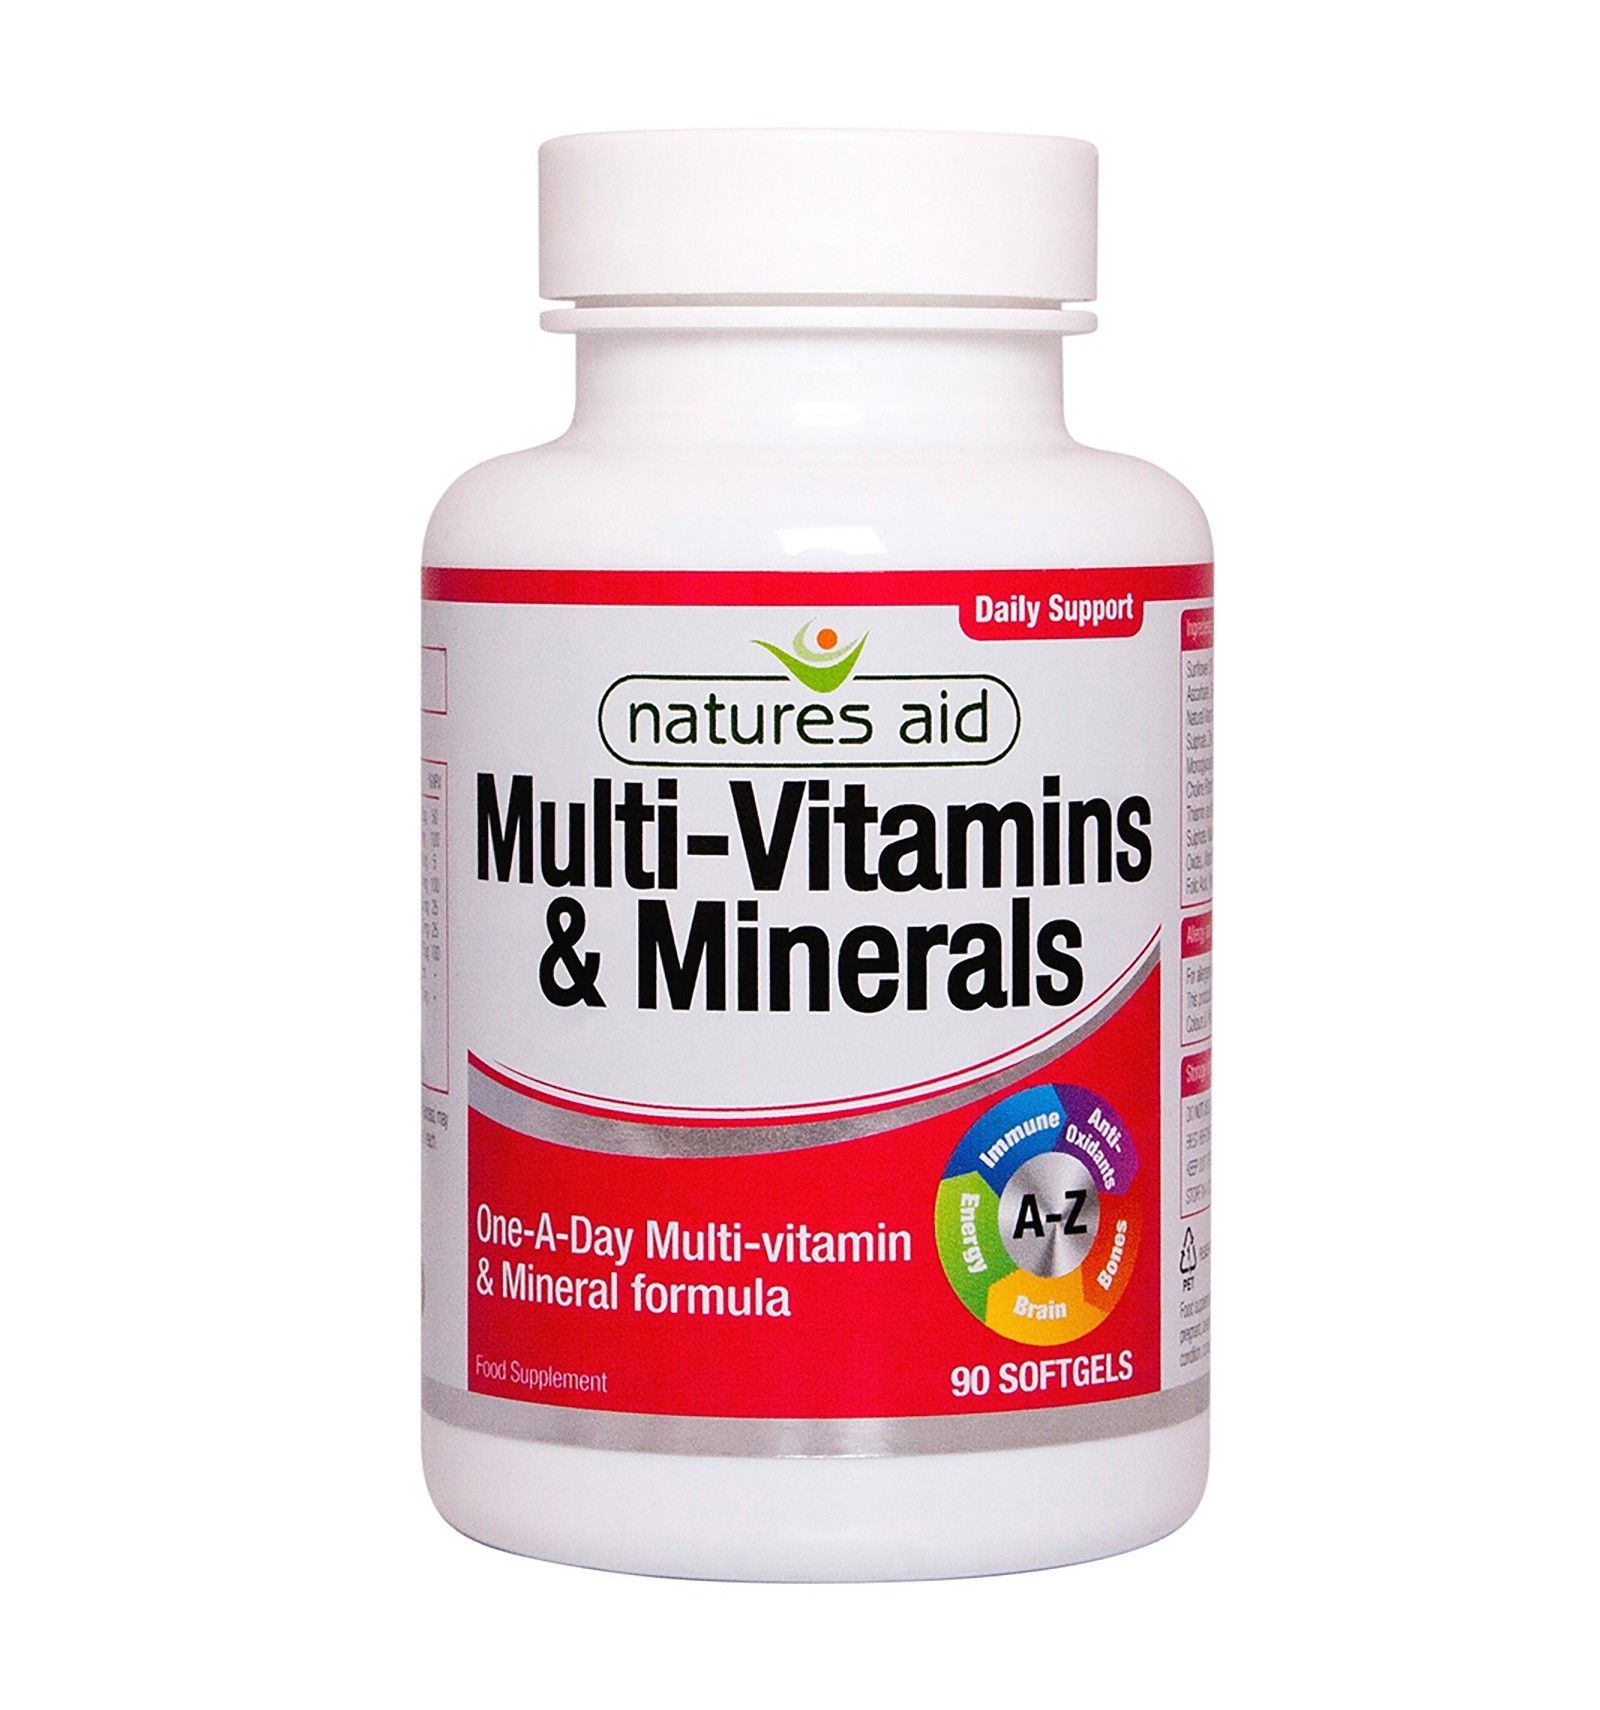 Natures Aid Multi-Vitamins and Minerals with Iron - 90 Softgels